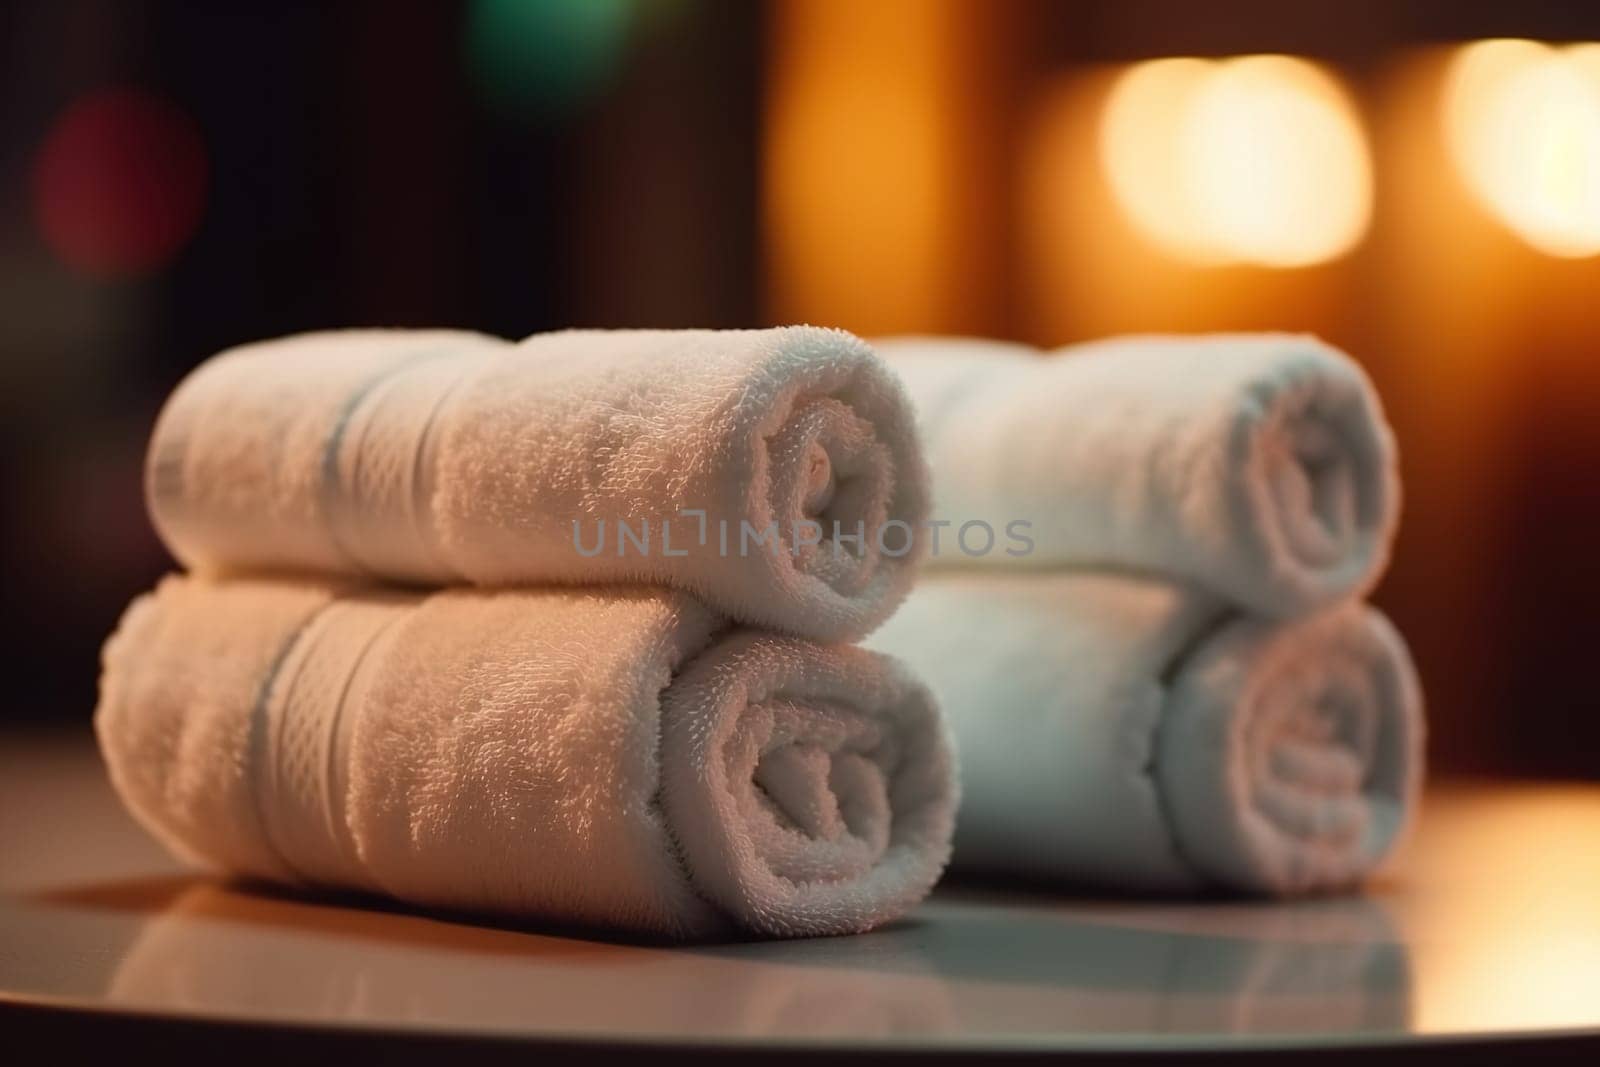 Spa treatments with stack of towels by tan4ikk1